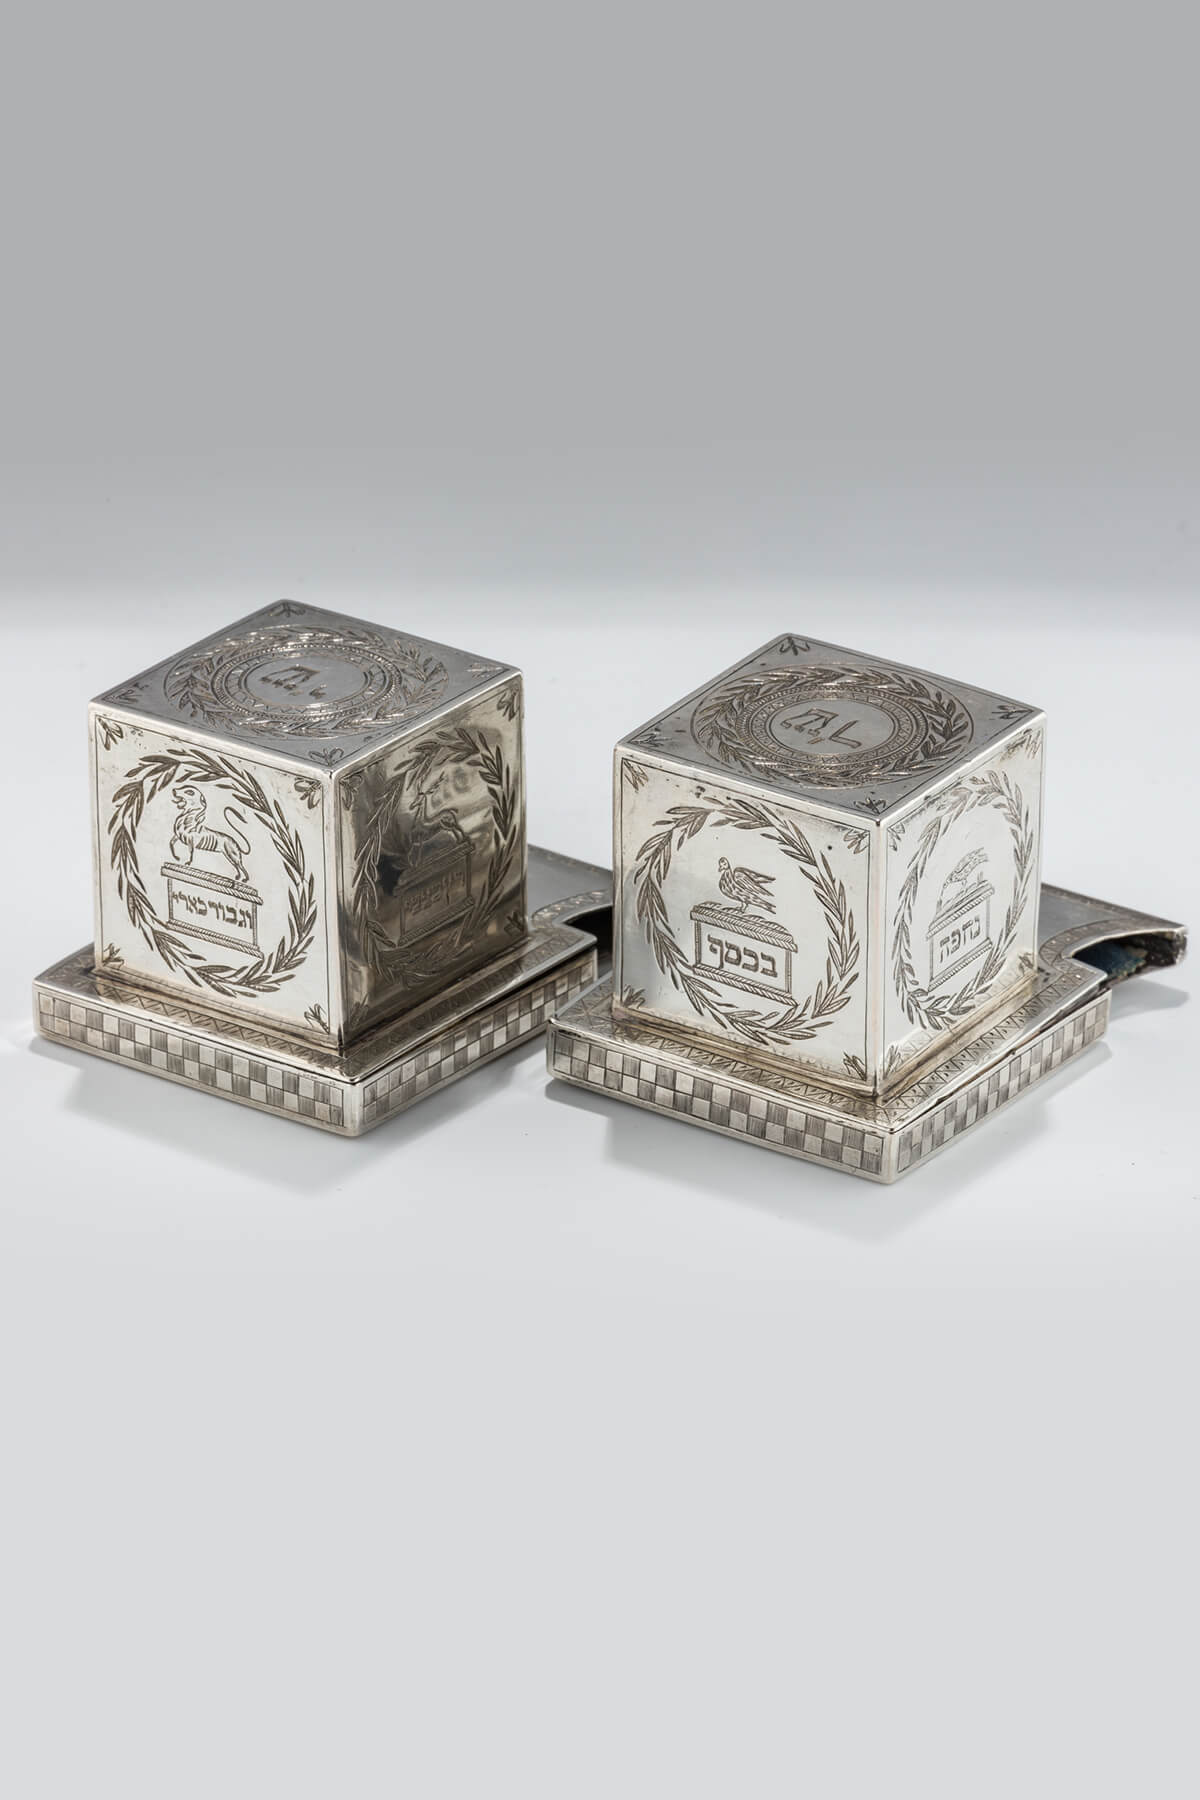 101. A Magnificent Pair of Silver Tefillin Cases